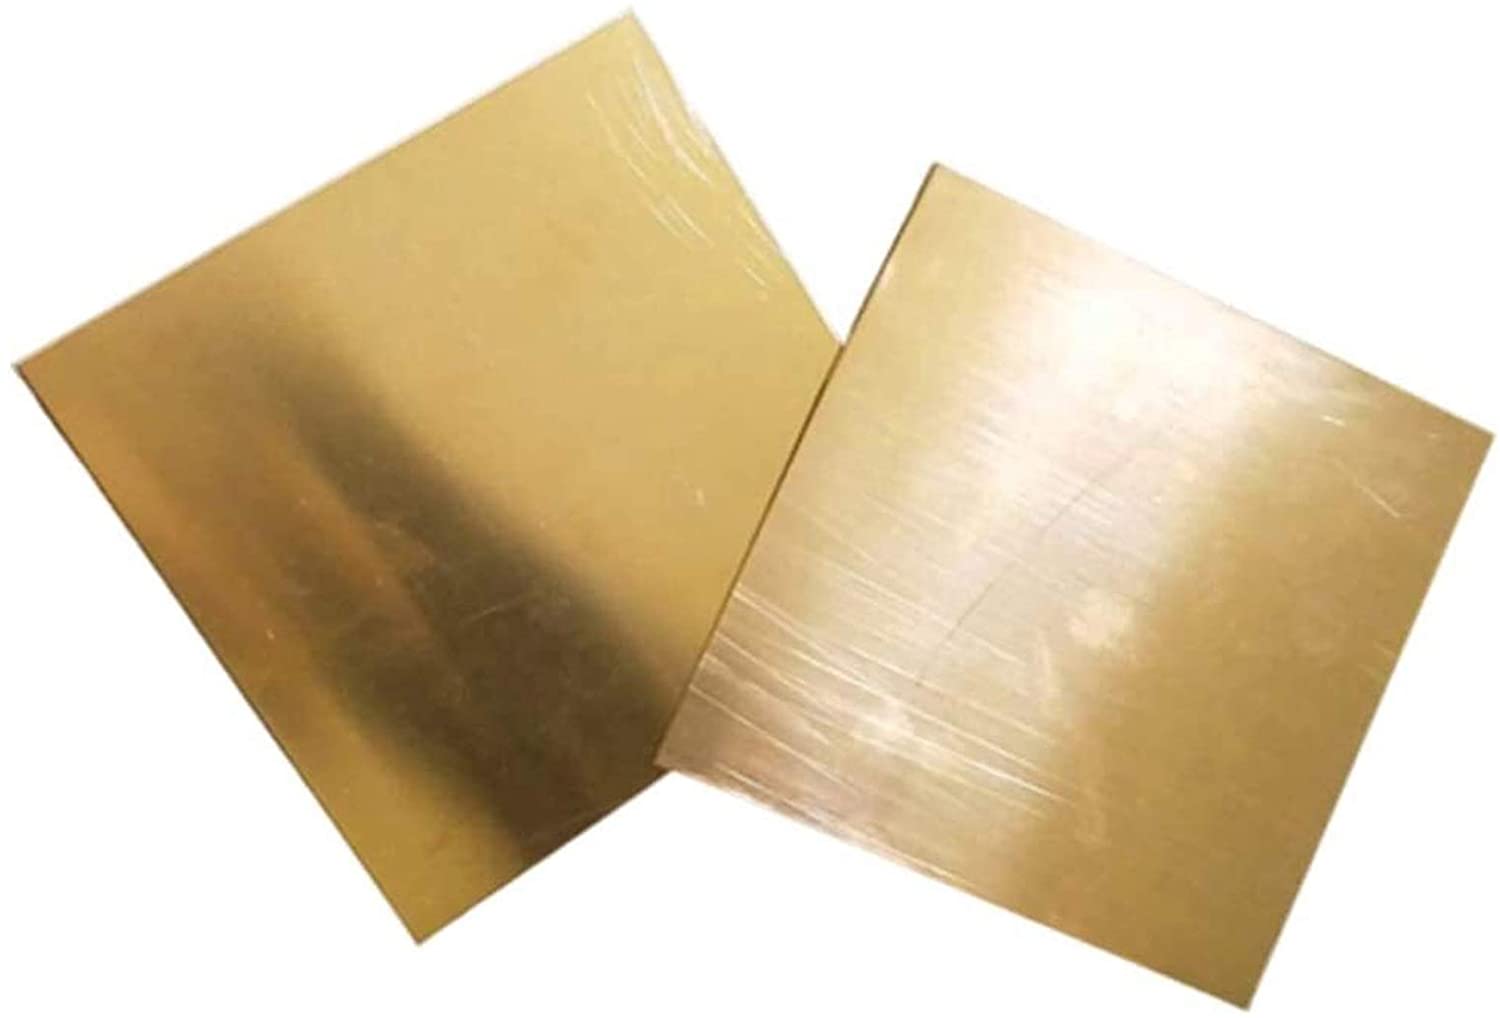 Axwadf Pure Copper Sheet Roll Cu Metal Sheet Foil Copper Plate for Shielding Sheet Size 200mmx1000mm,Thickness 0.02mm